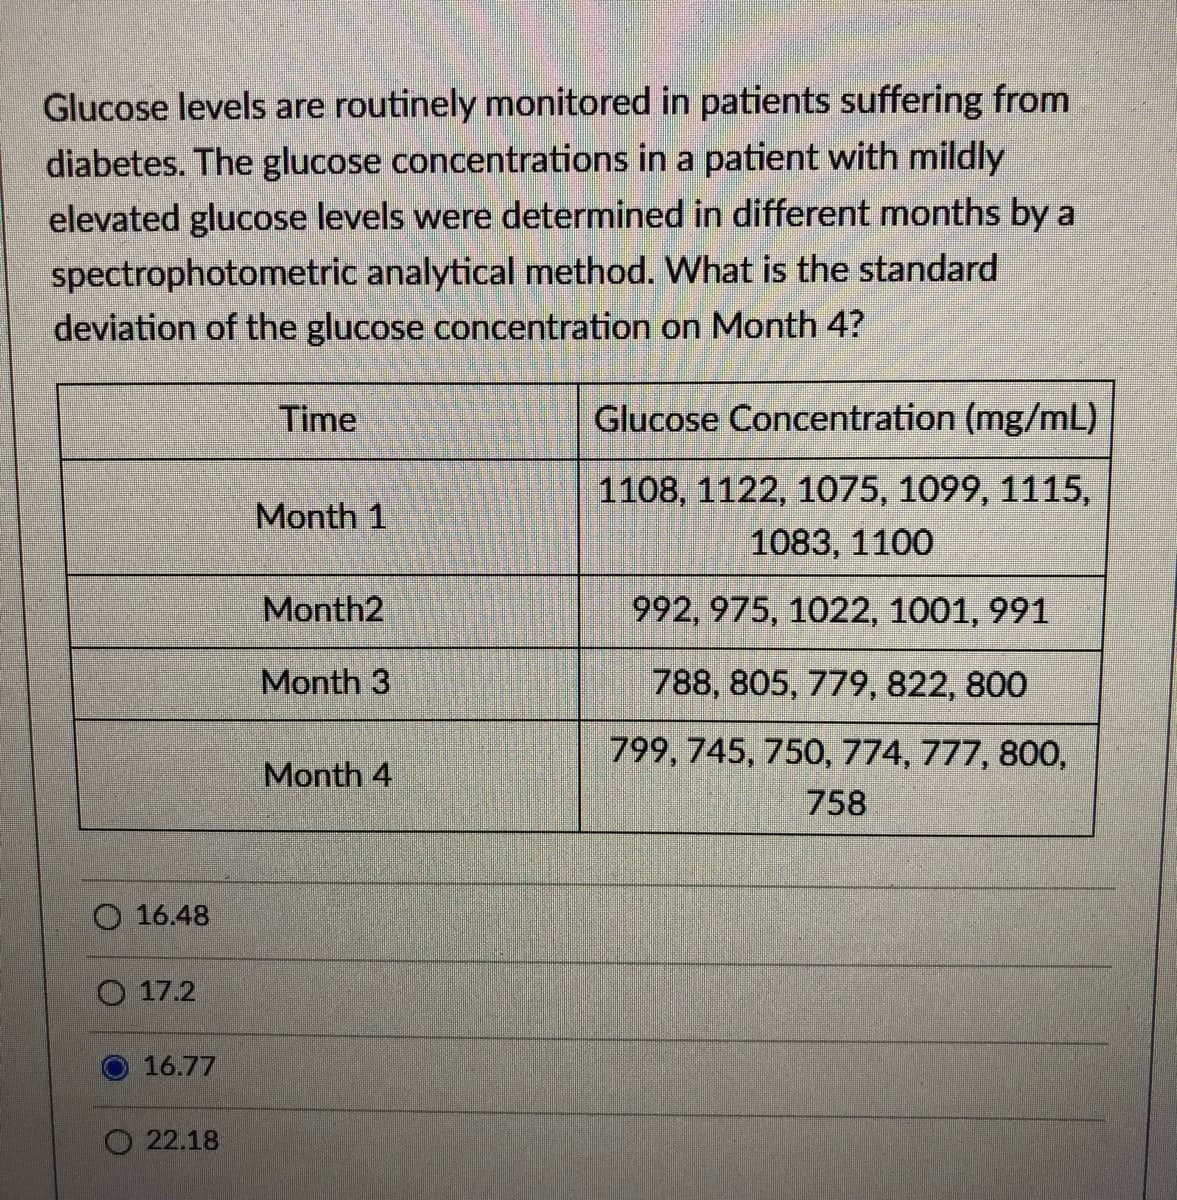 Glucose levels are routinely monitored in patients suffering from
diabetes. The glucose concentrations in a patient with mildly
elevated glucose levels were determined in different months by a
spectrophotometric analytical method. What is the standard
deviation of the glucose concentration on Month 4?
Time
Glucose Concentration (mg/mL)
1108, 1122, 1075, 1099, 1115,
Month 1
1083, 1100
Month2
992, 975, 1022, 1001, 991
Month 3
788, 805, 779, 822, 800
799, 745, 750, 774, 777, 800,
Month 4
758
O 16.48
O 17.2
O16.77
O 22.18
